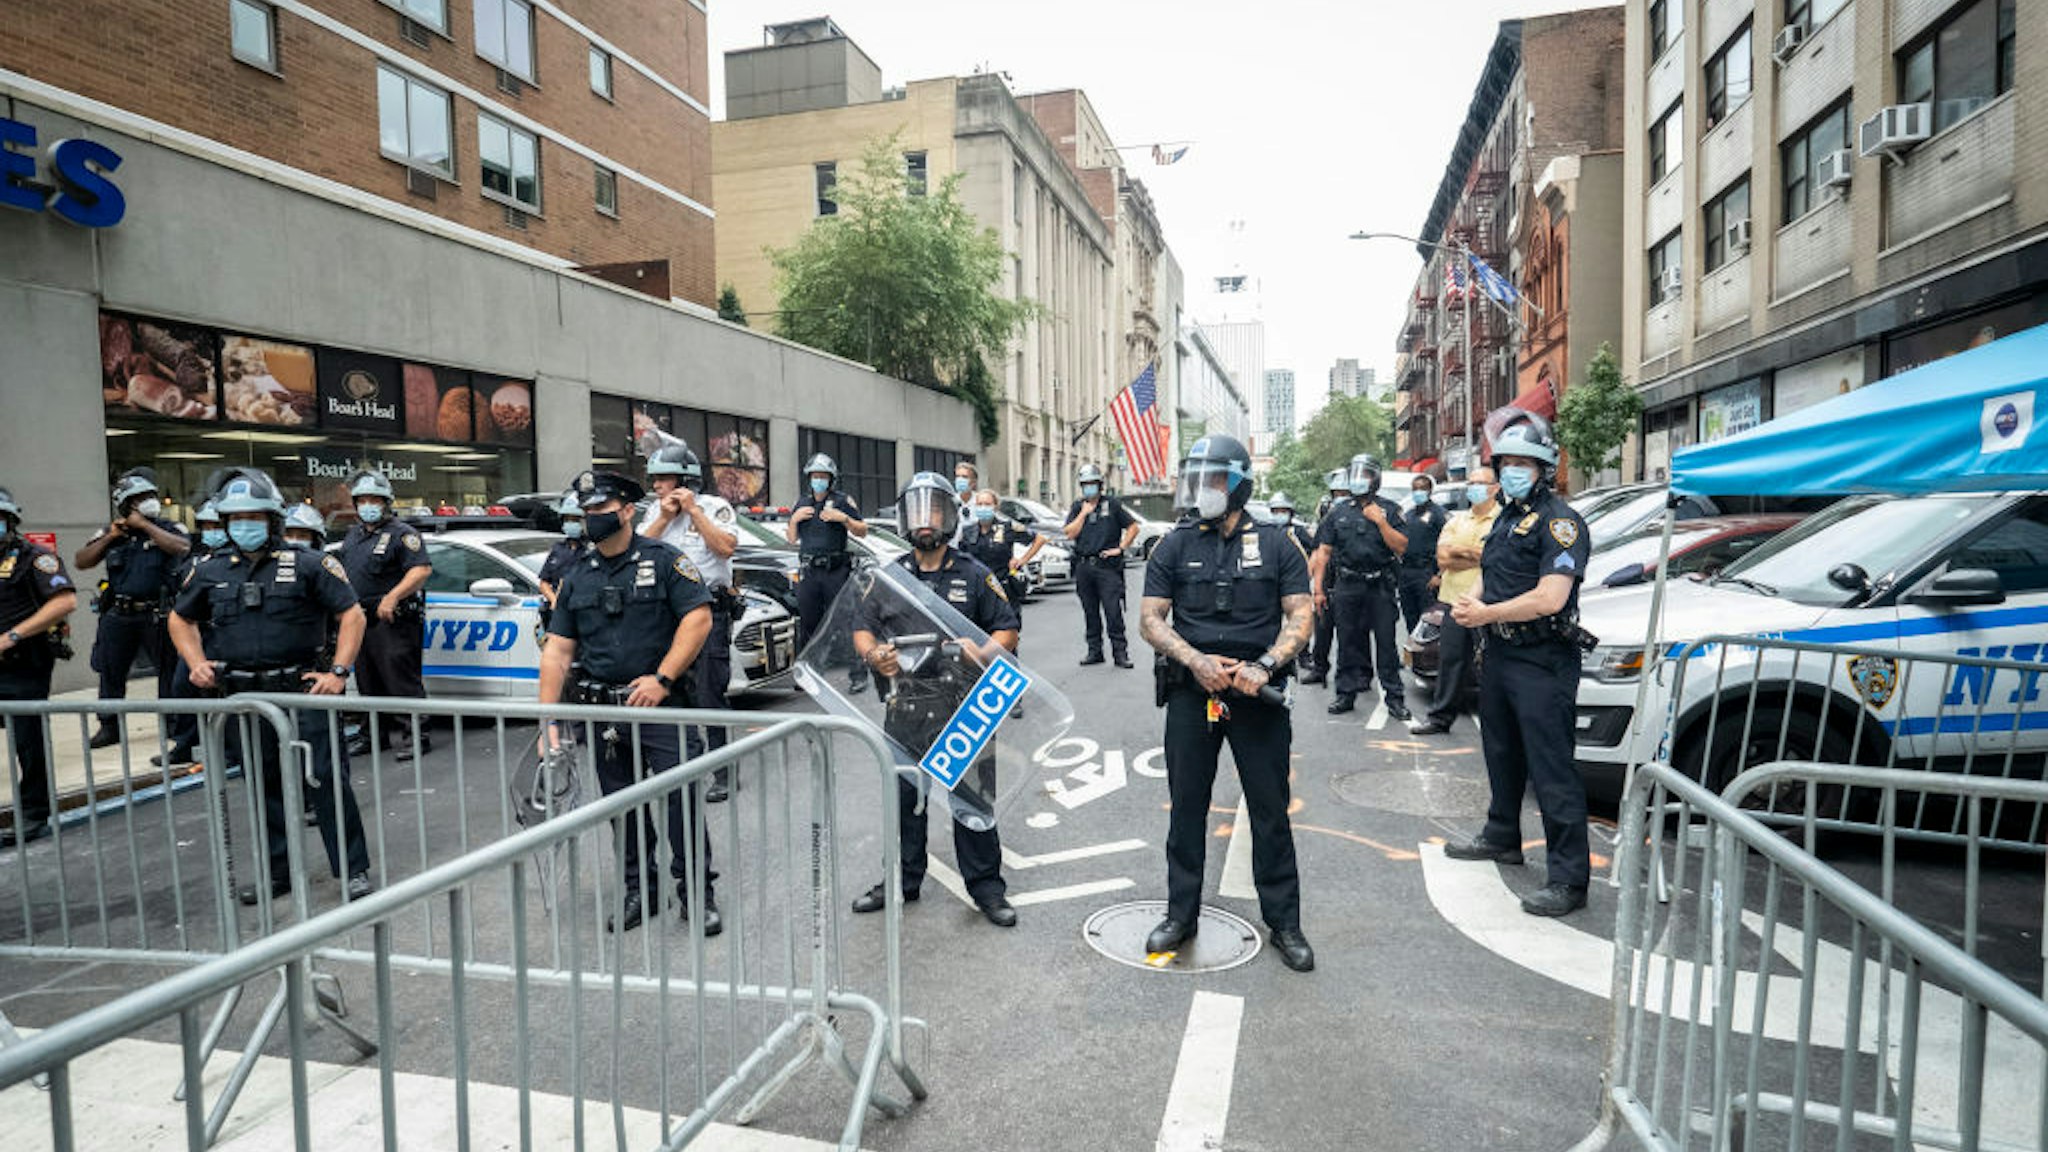 A line of police in protective helmets and riot shields wait to meet Derrick Ingram and supporters on August 08, 2020 in the Manhattan borough of New York City.